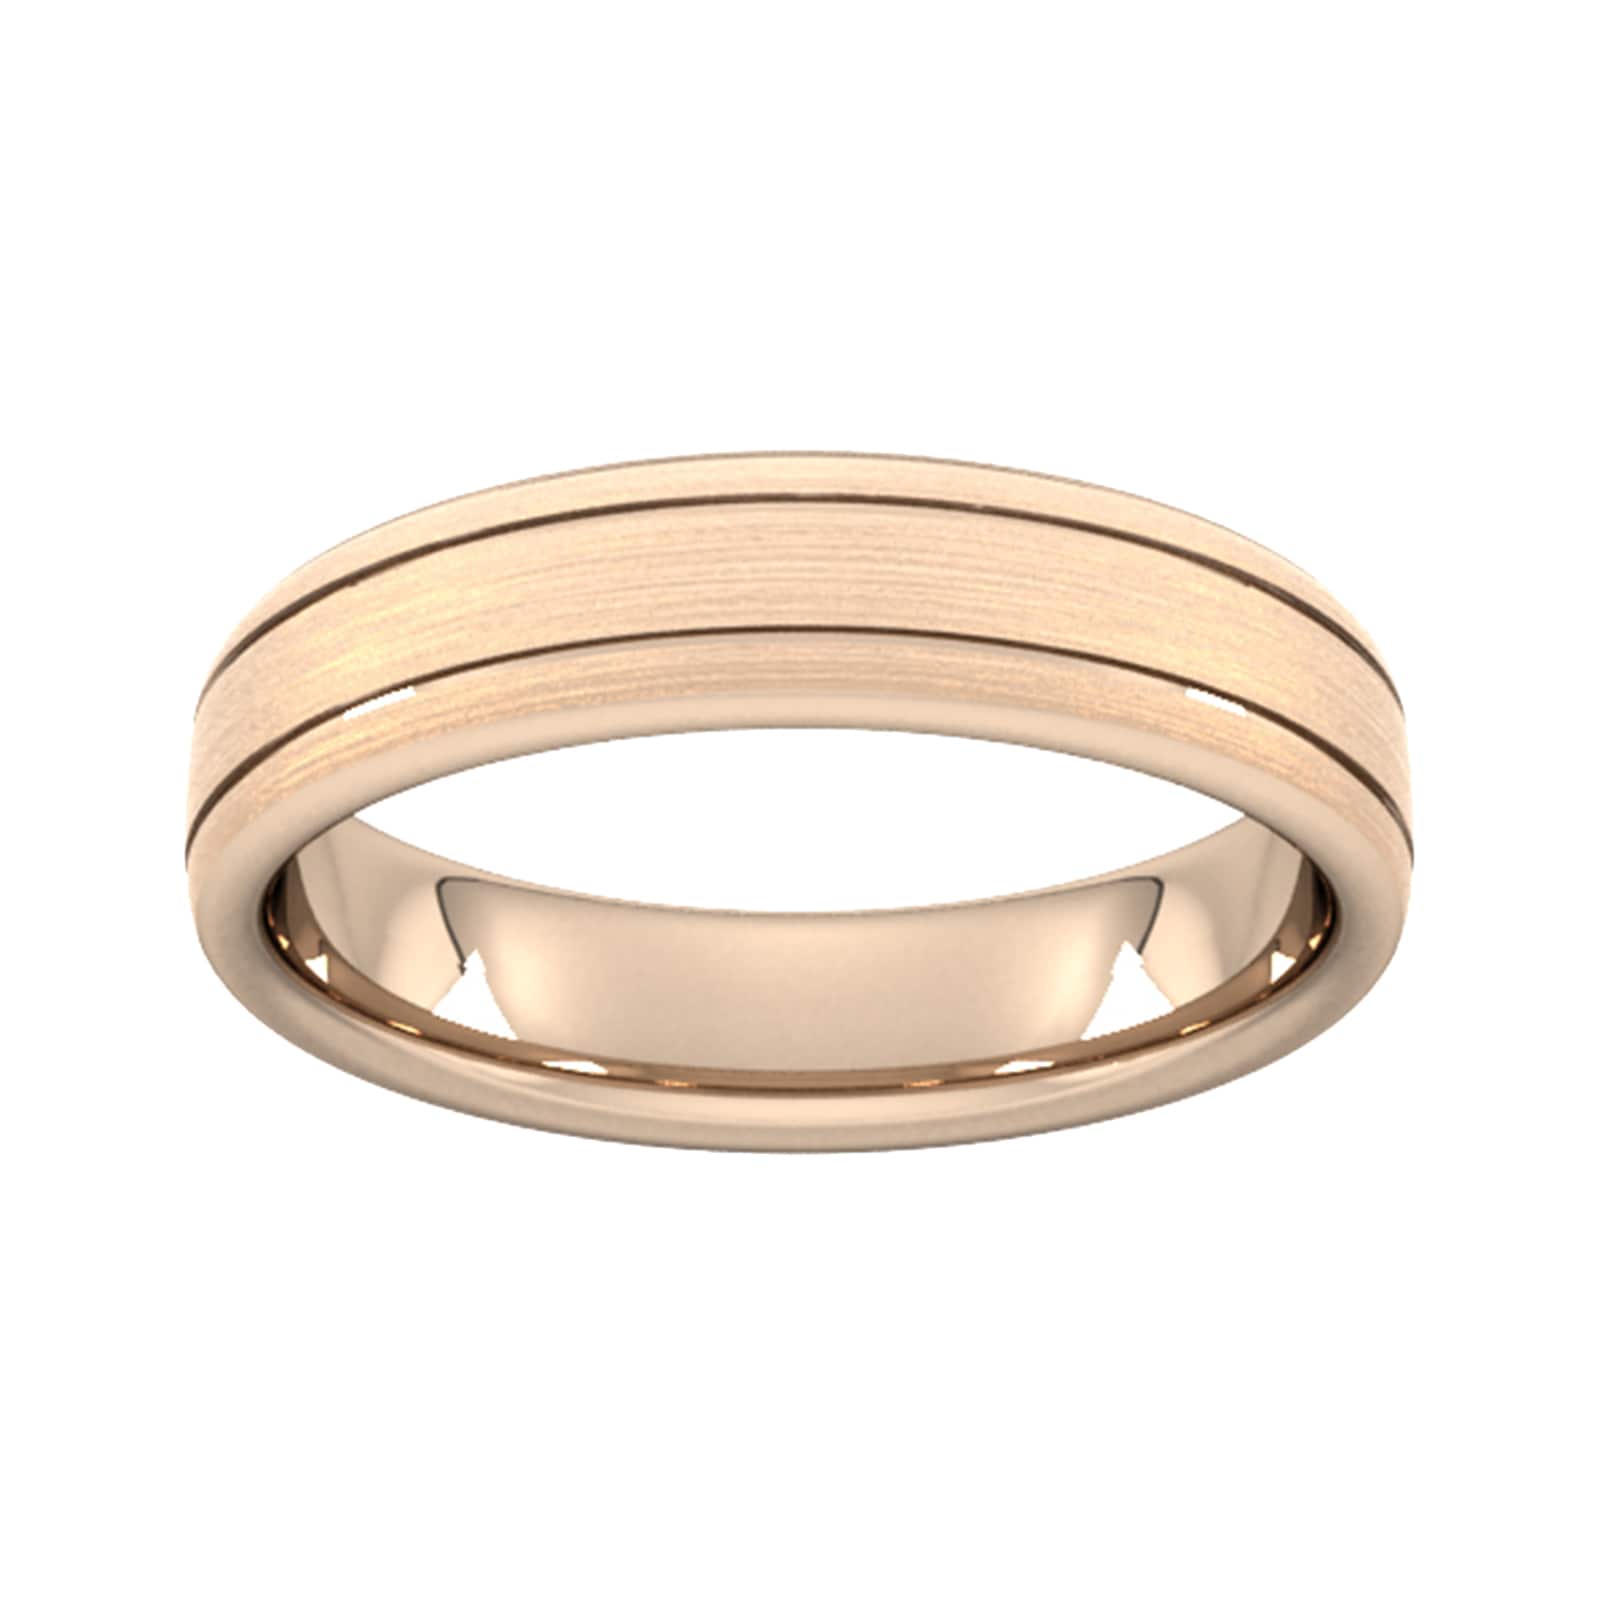 5mm Slight Court Standard Matt Finish With Double Grooves Wedding Ring In 9 Carat Rose Gold - Ring Size U